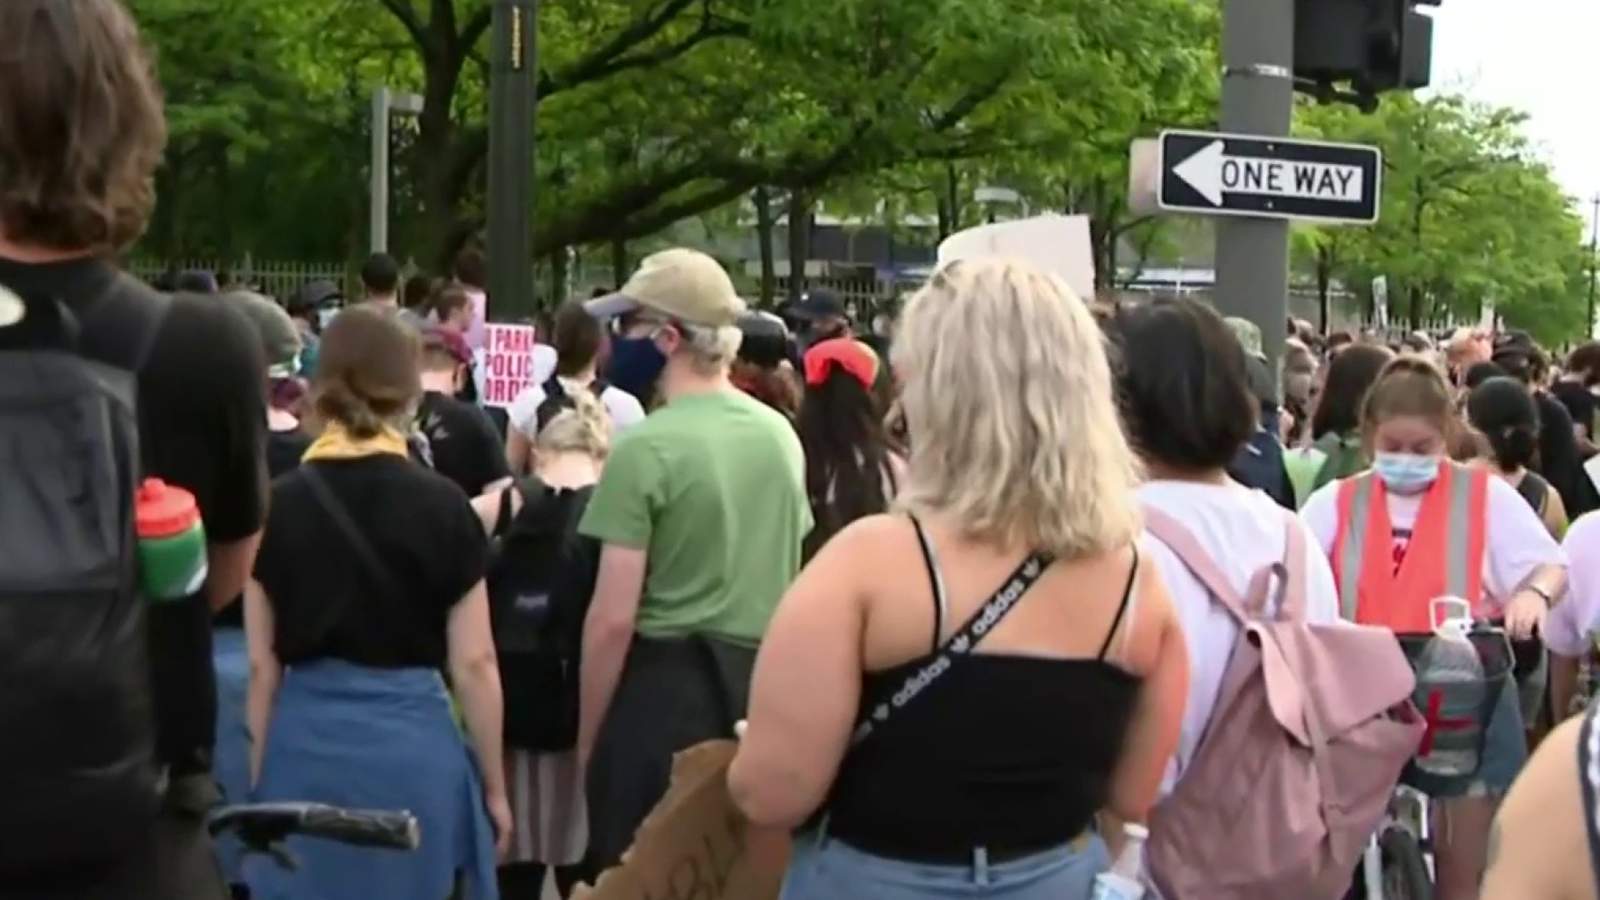 Protesters gather in Downtown Detroit on June 4, 2020